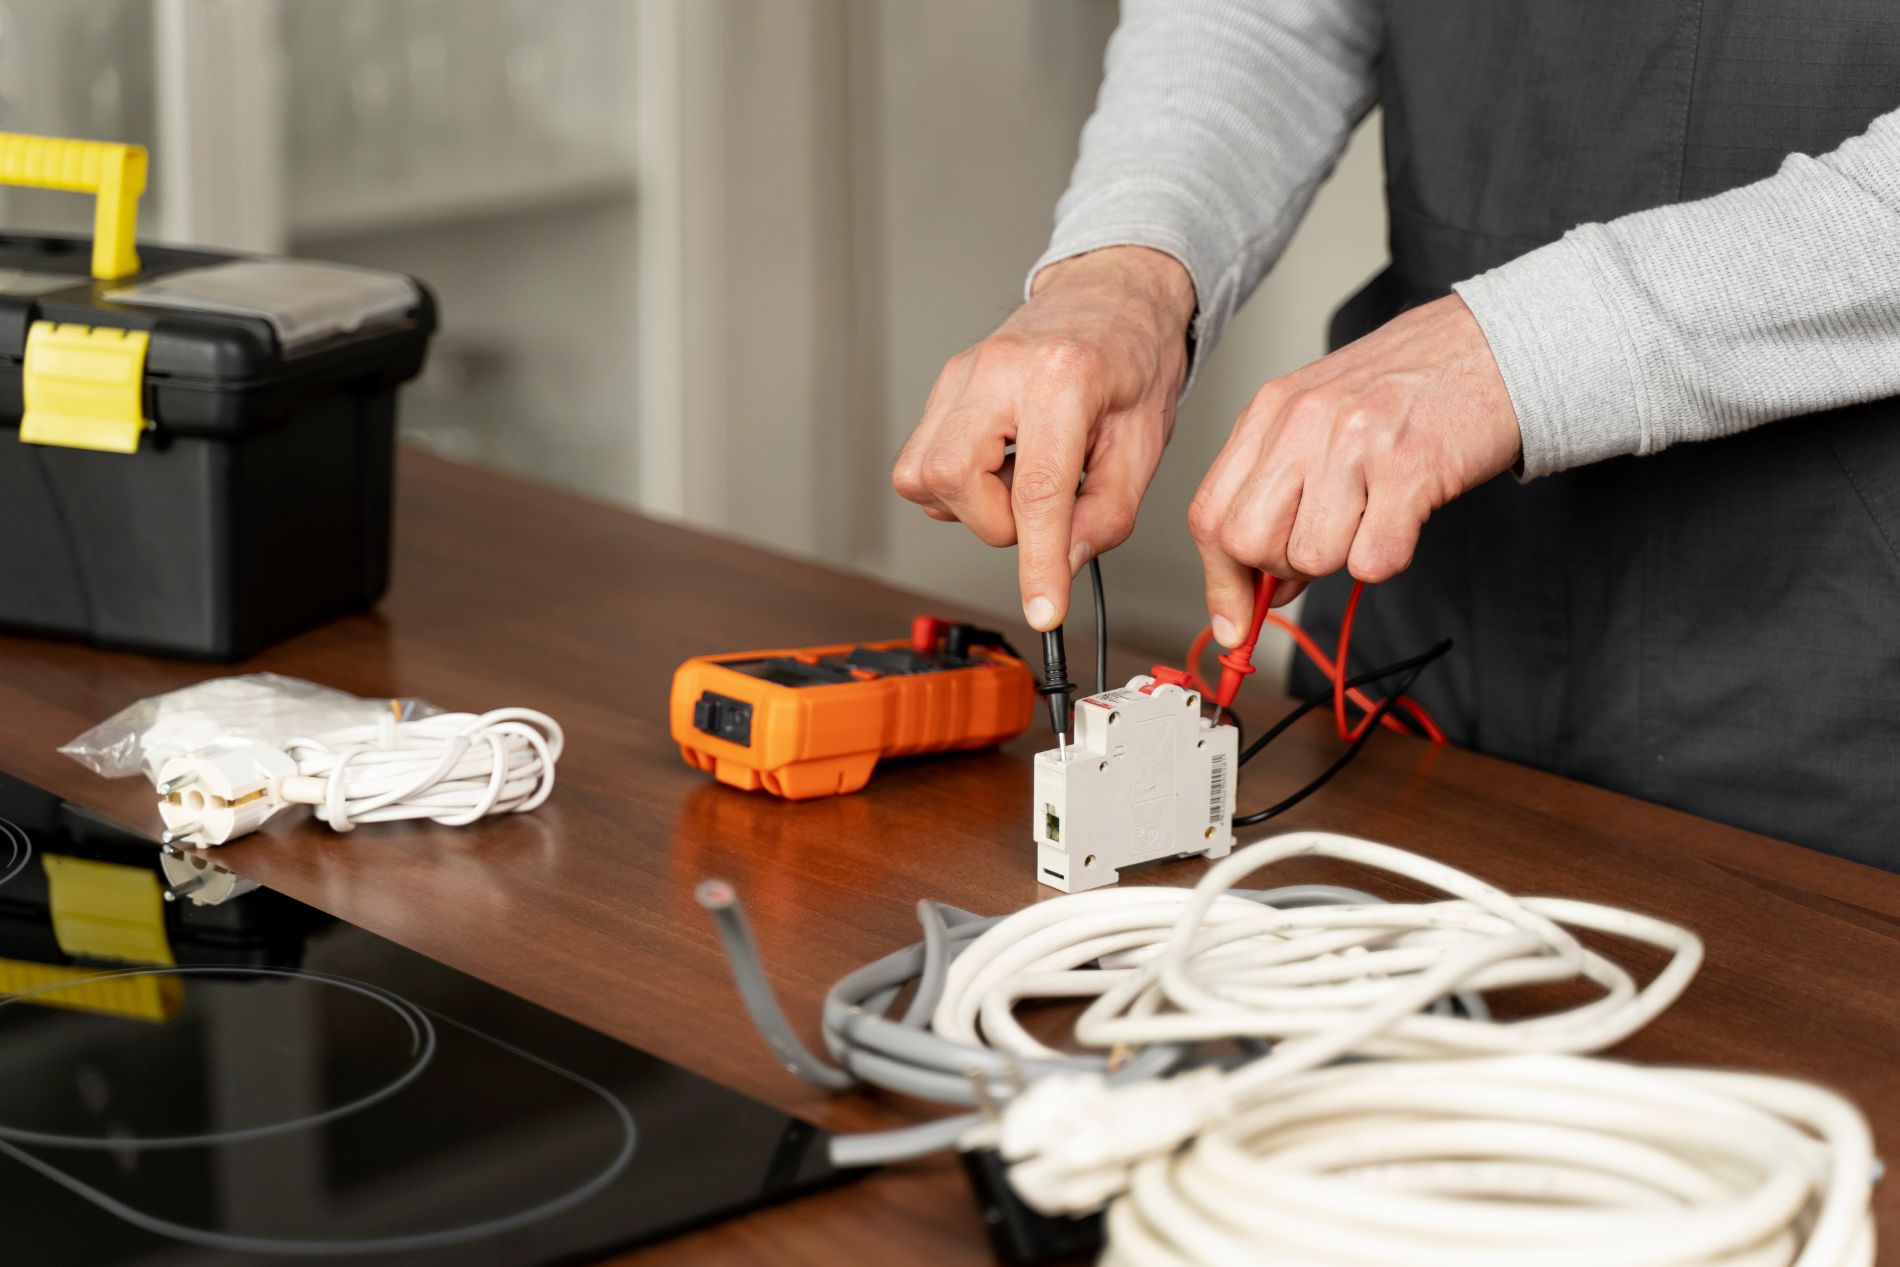 Tackling Small Electrical Repairs: Safety and Techniques